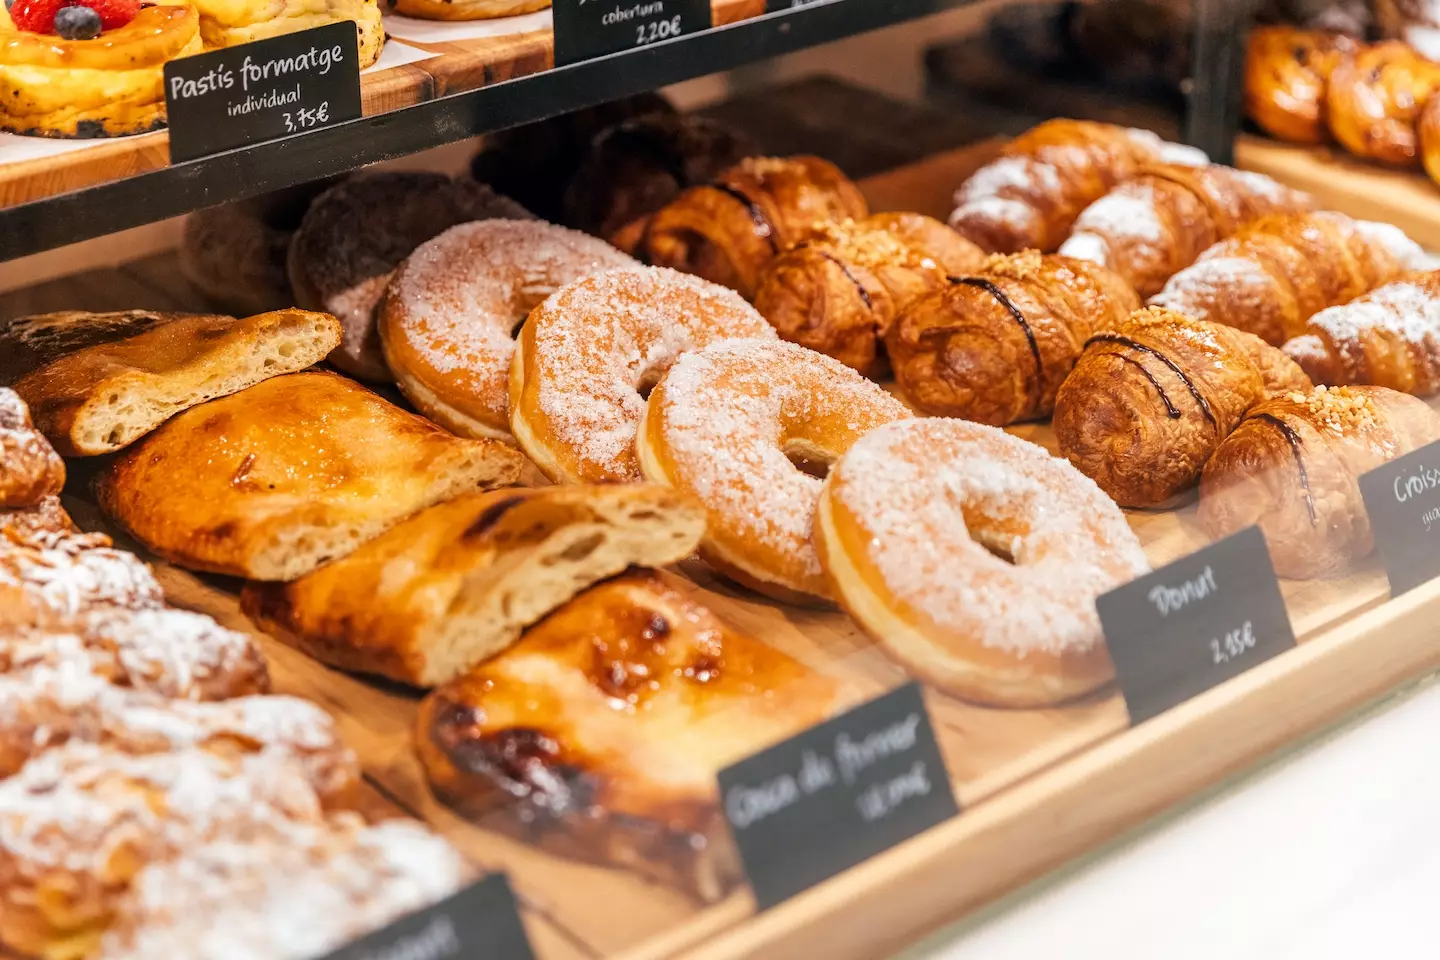 Keep your pastries at room temperature, though if they're packed with dairy products be aware of them going off.